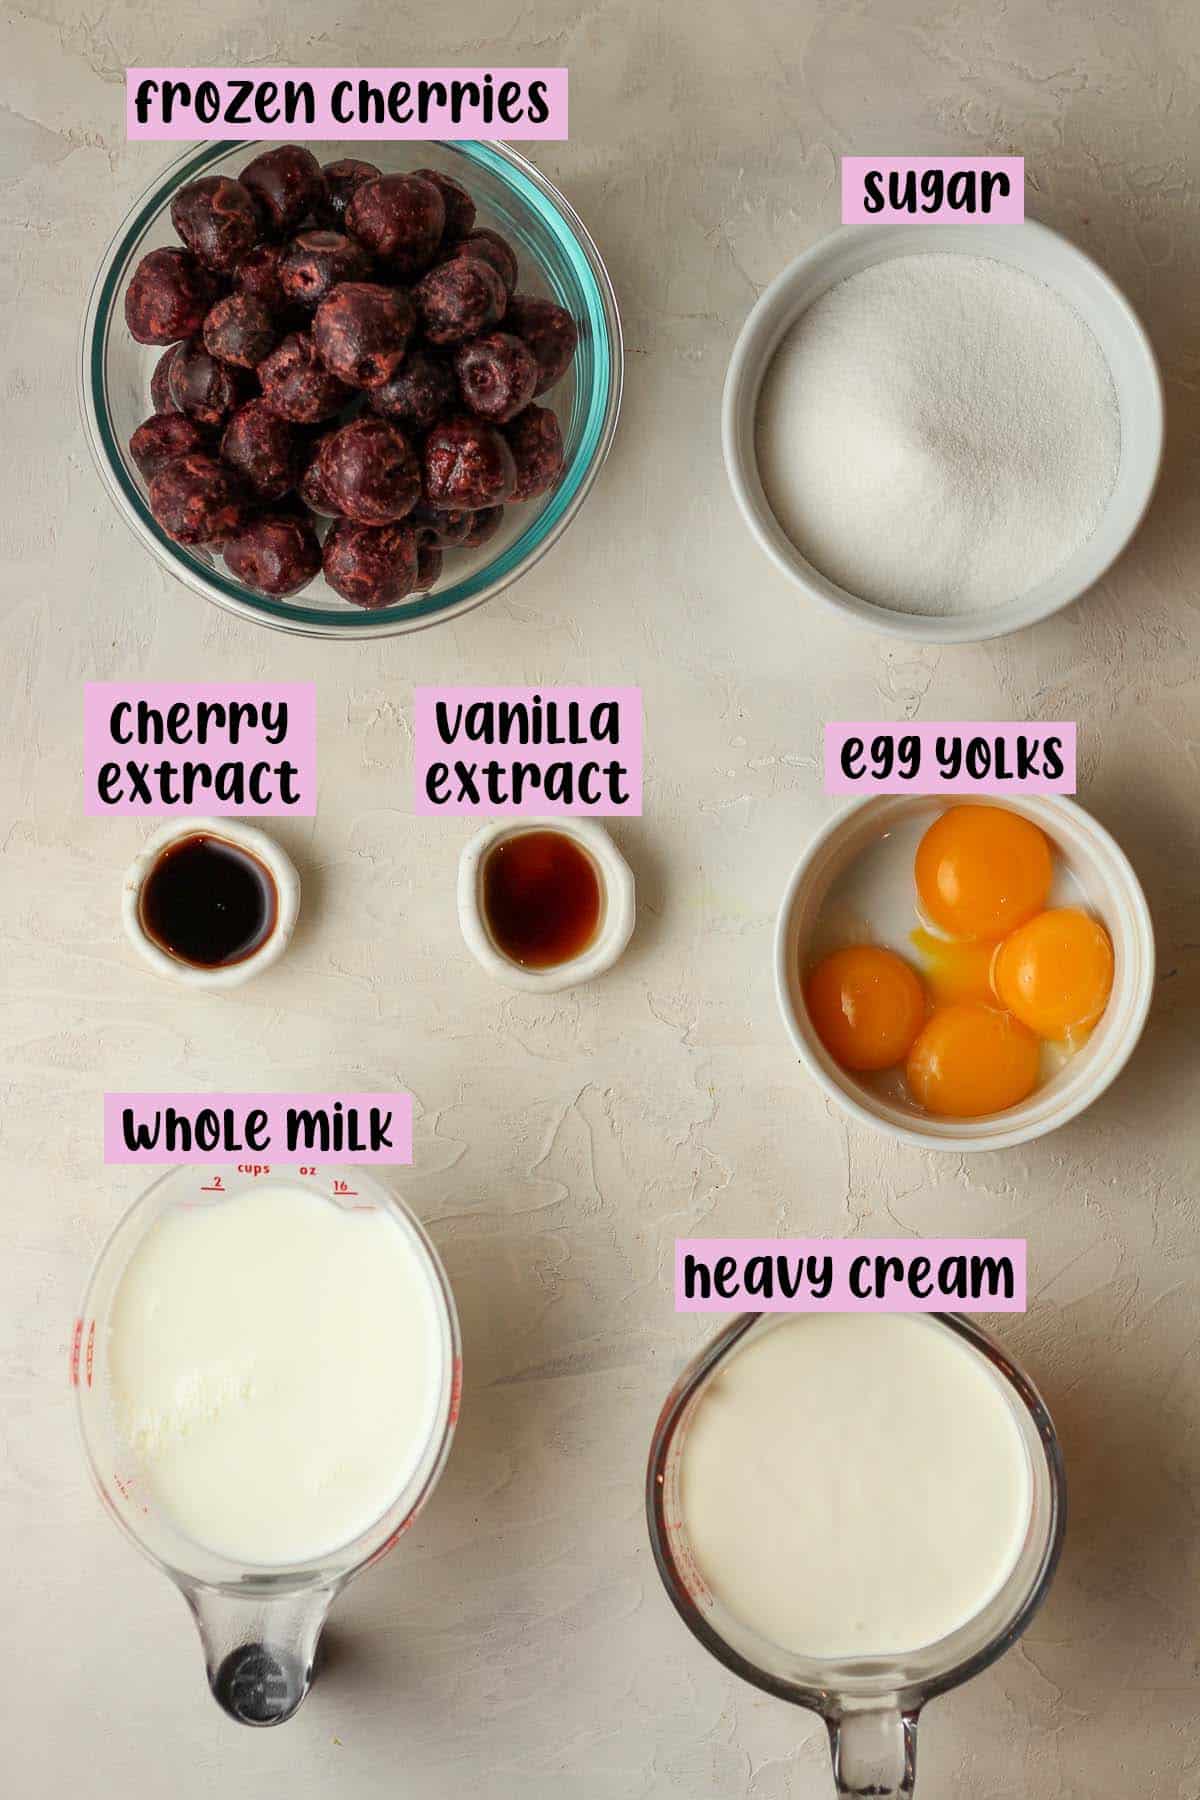 The labeled ingredients for black cherry ice cream.